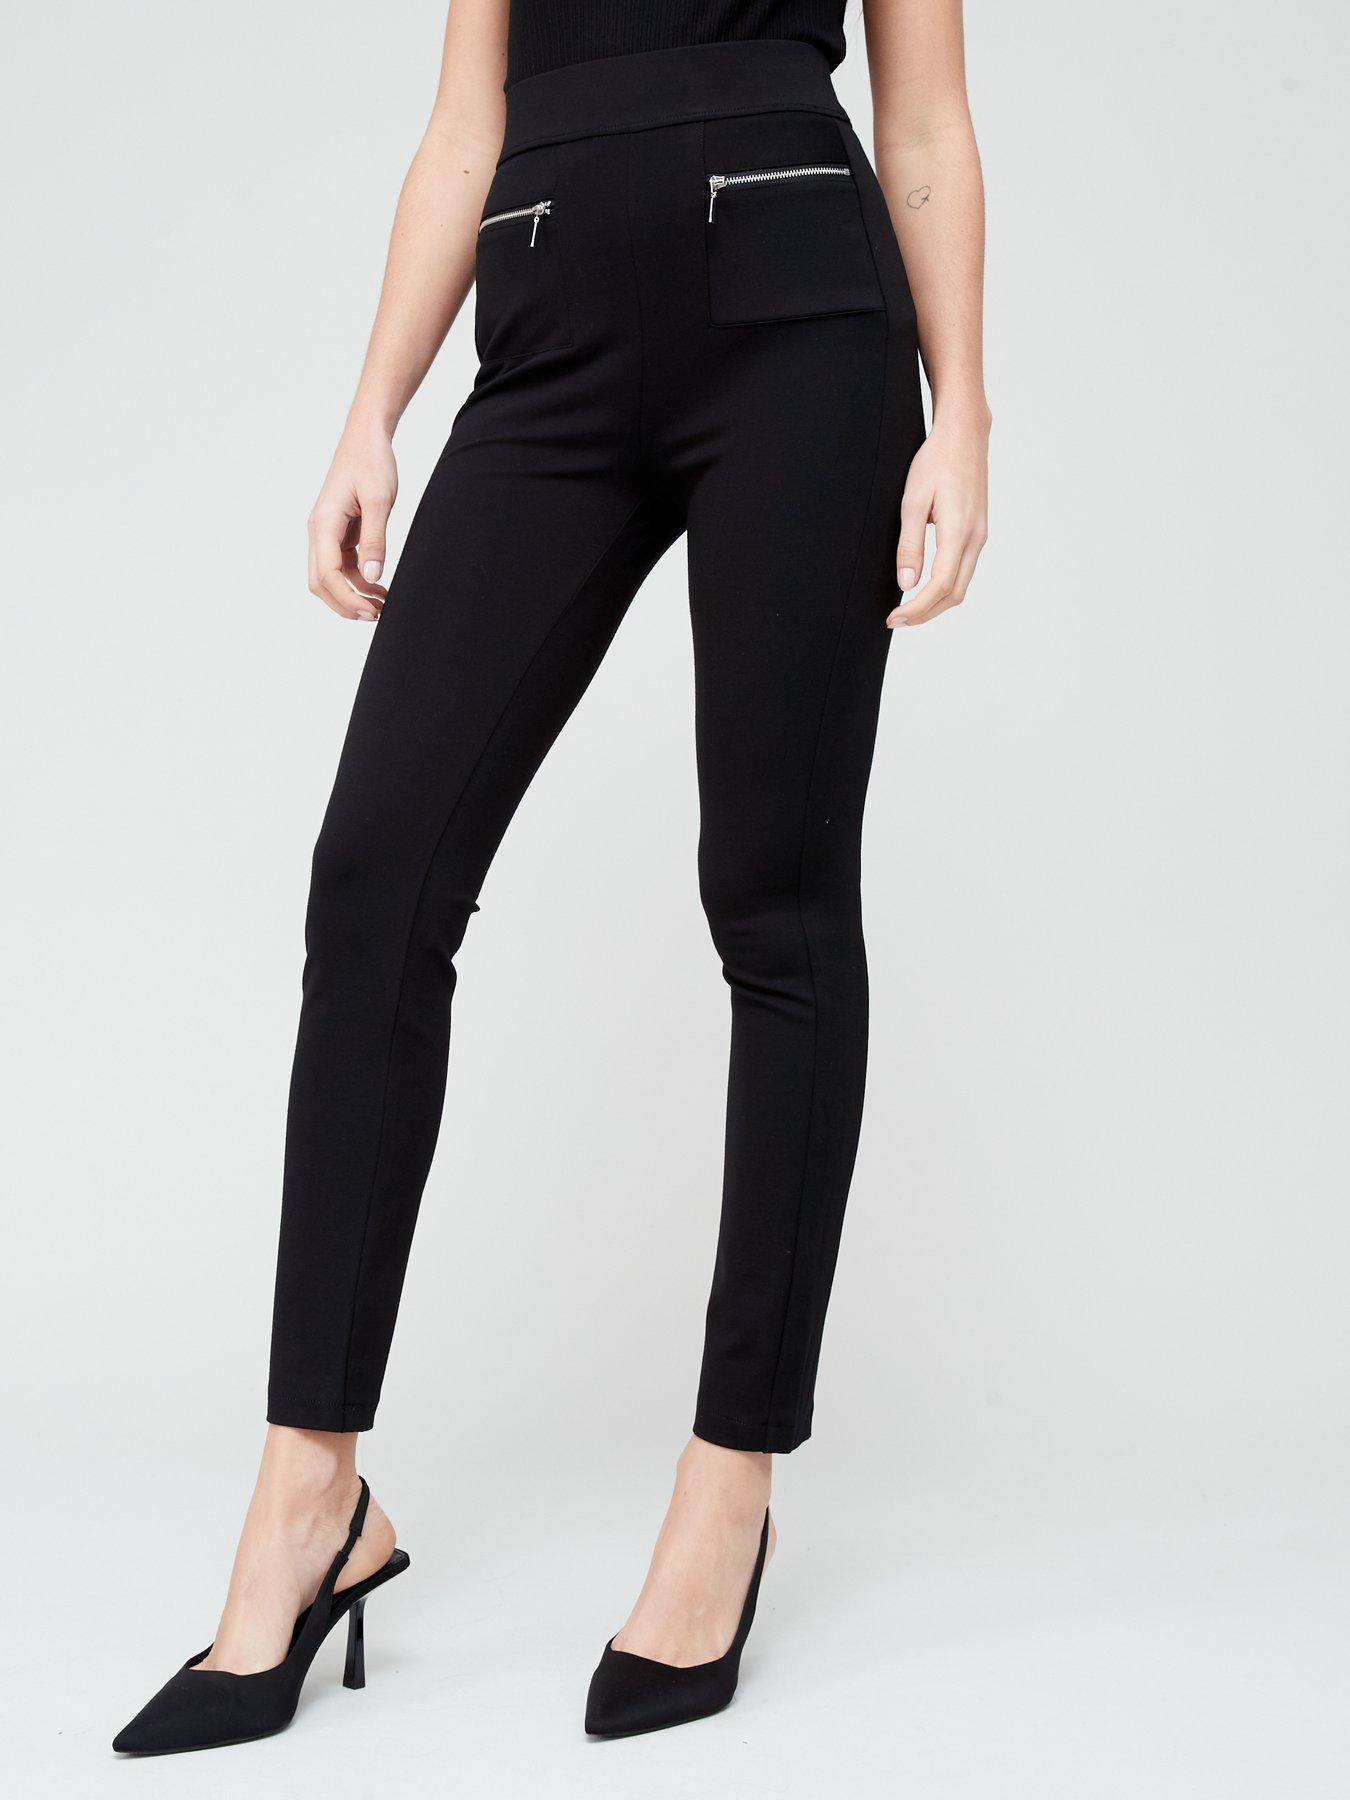 Ultra High Waisted Tailored Skinny Pants